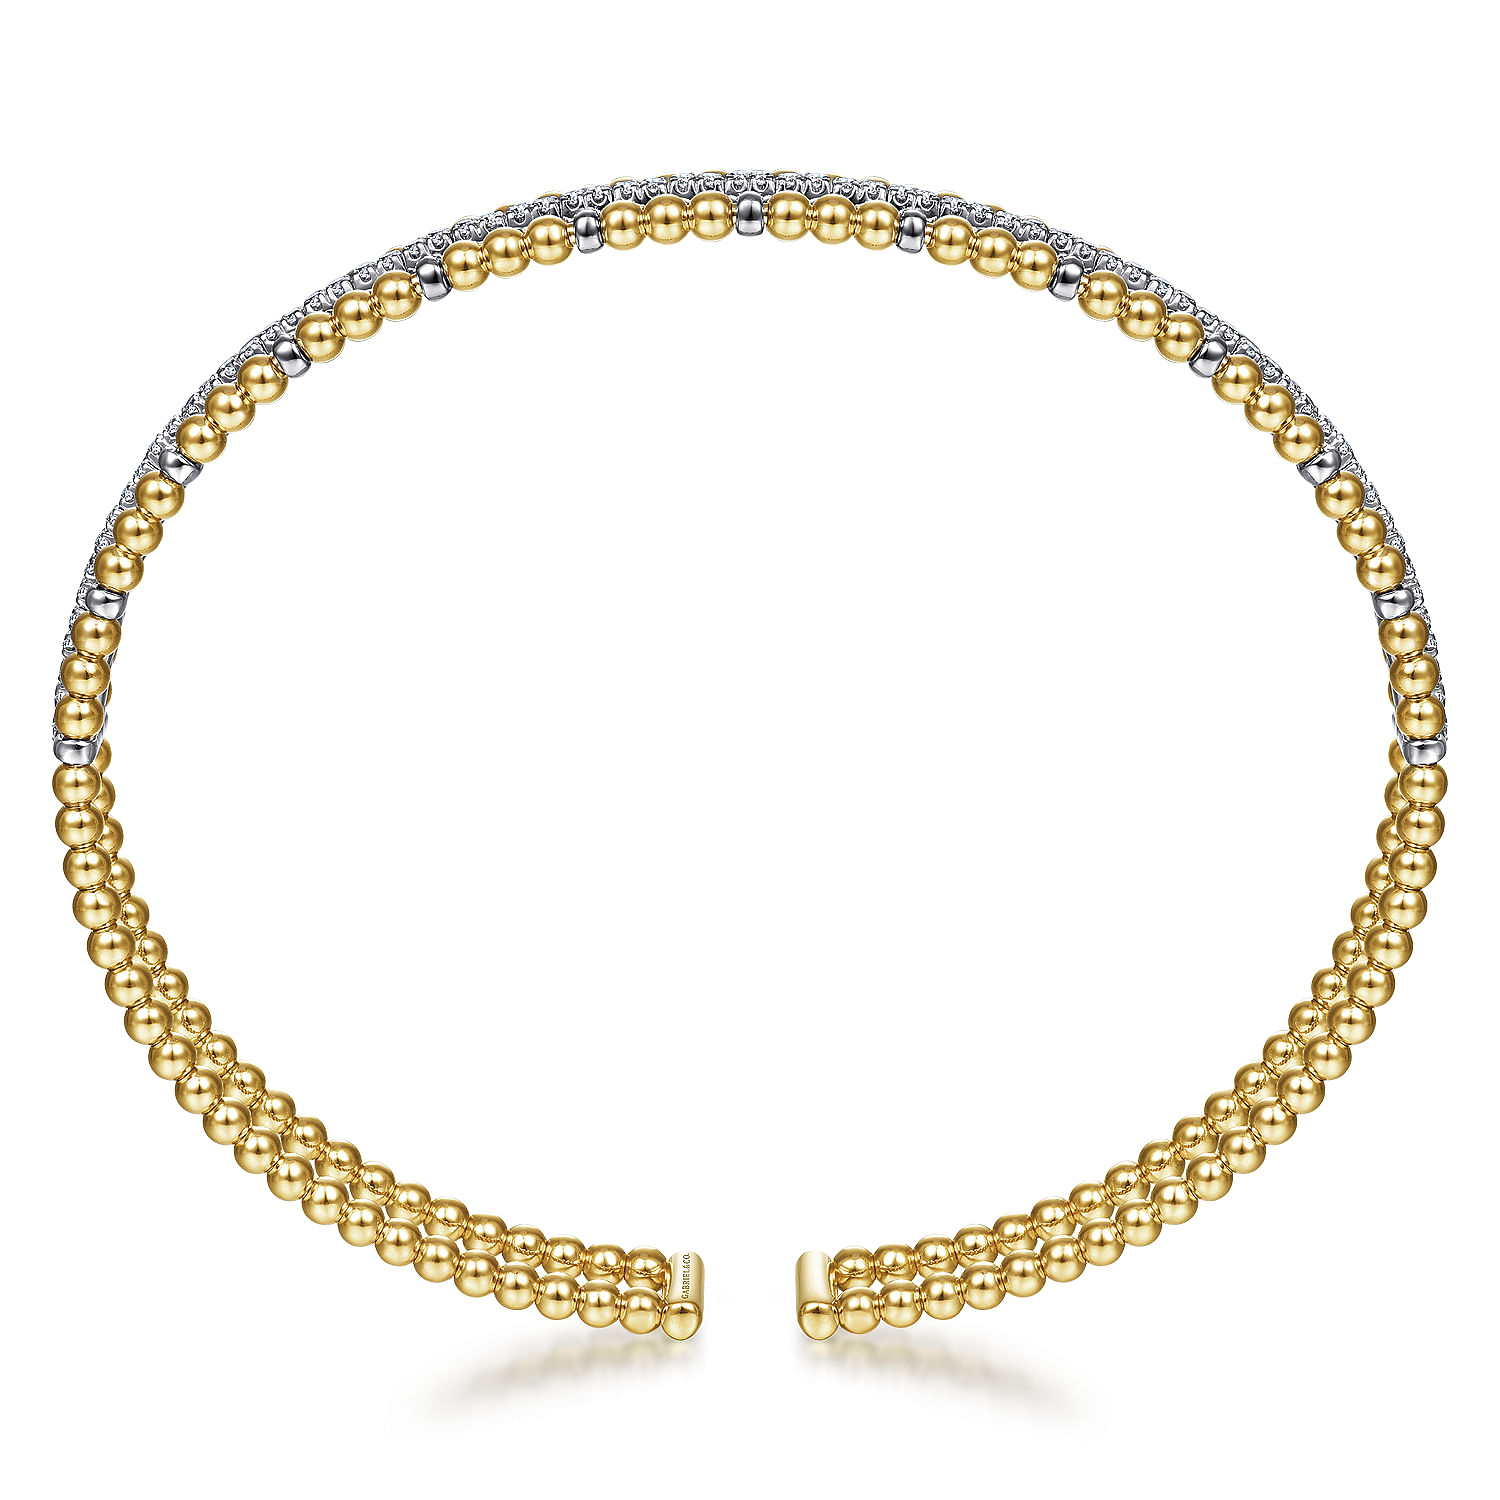 14K Yellow and White Gold Bujukan Bead Cuff Bracelet with Inner Diamond Channel